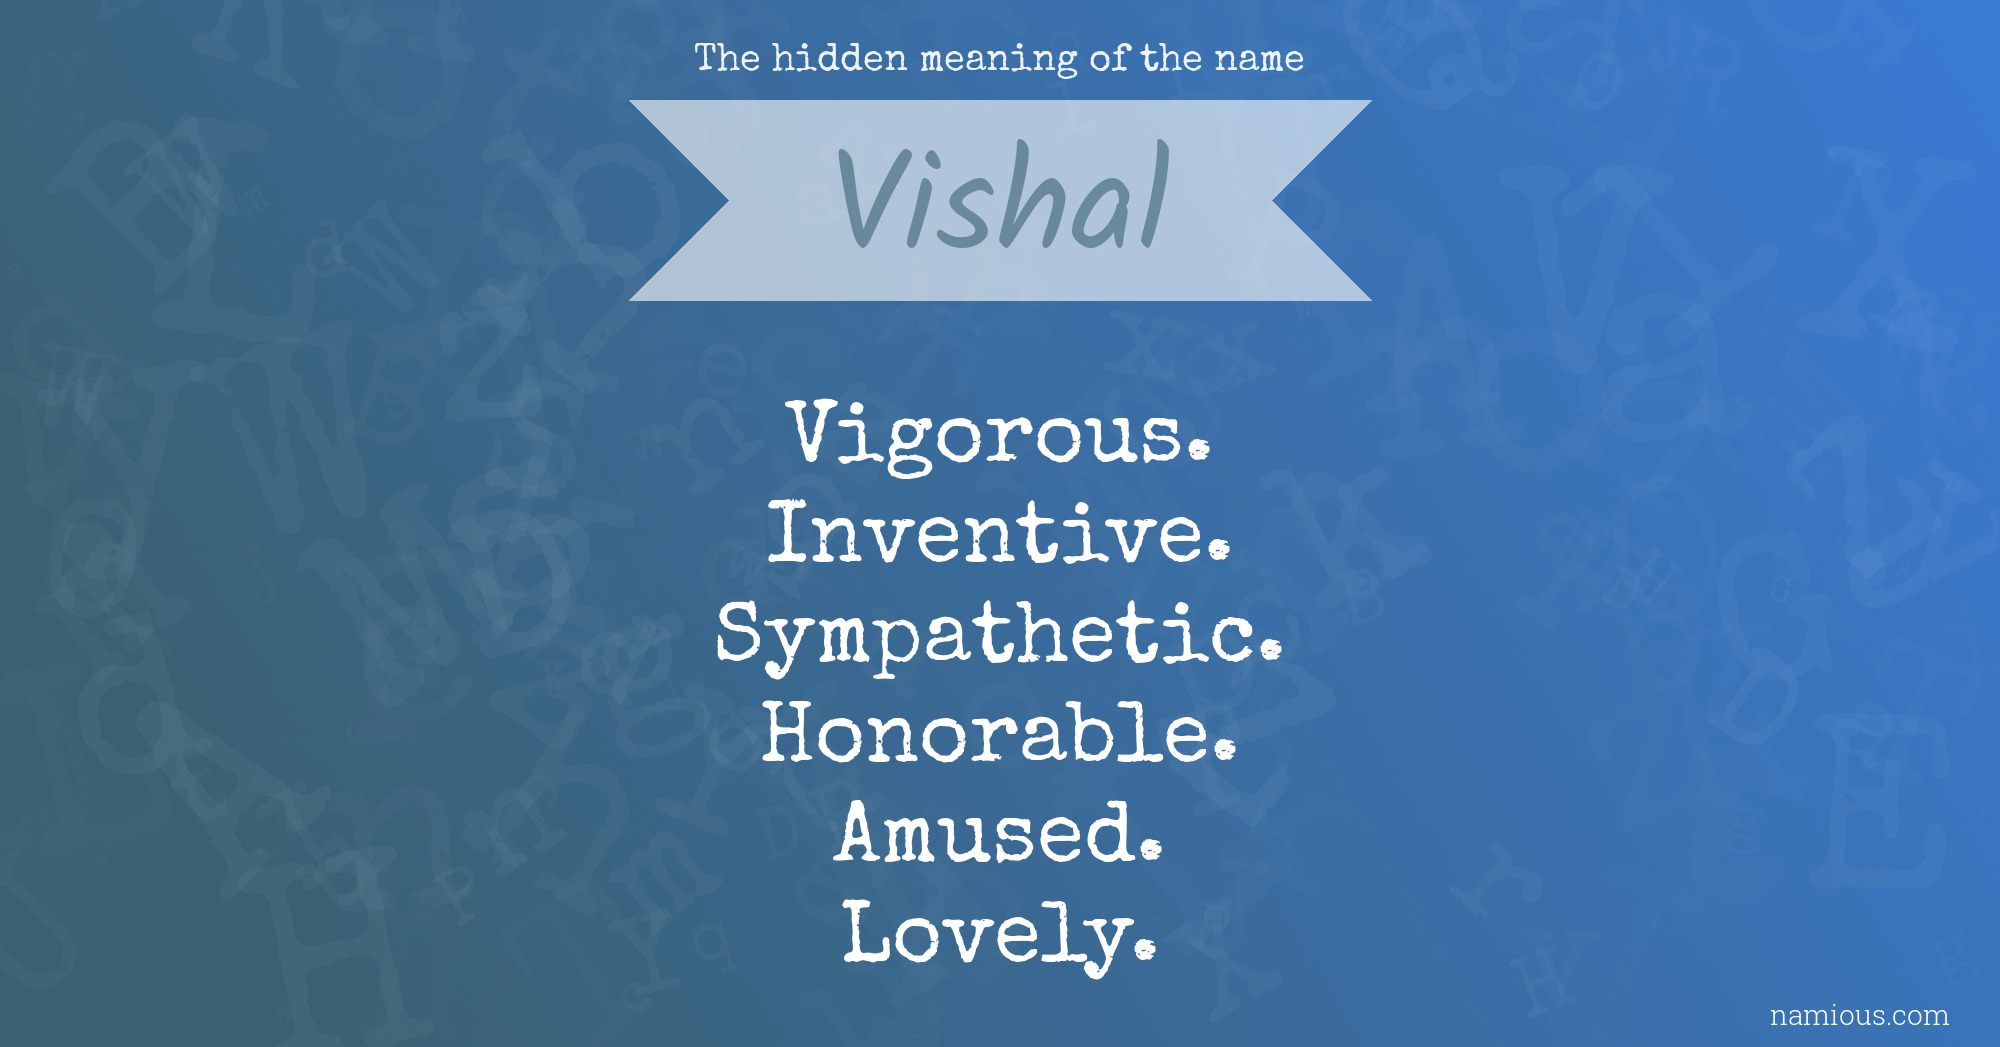 The hidden meaning of the name Vishal